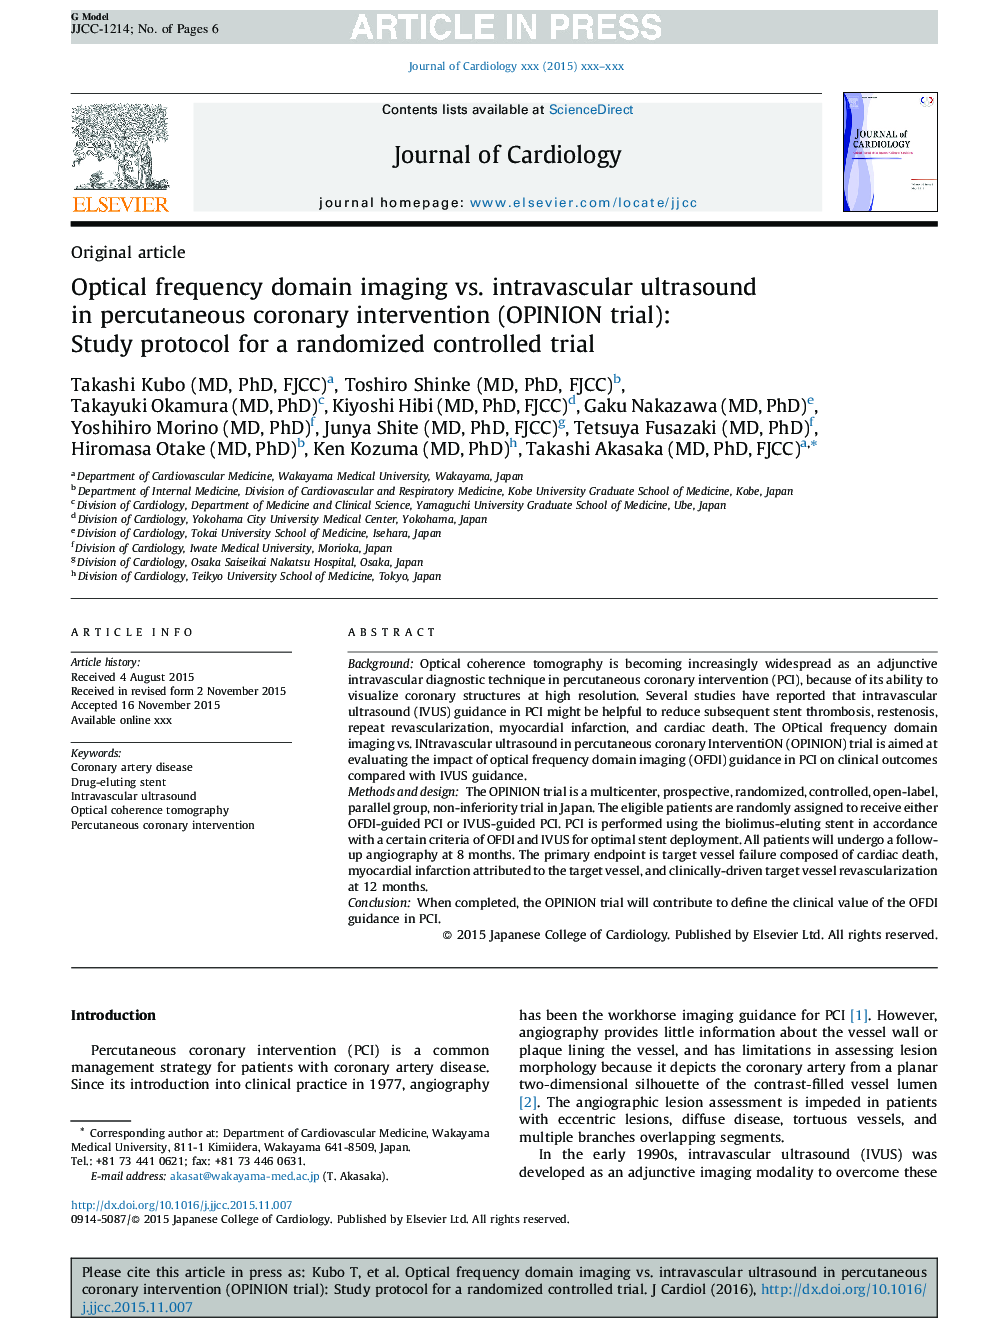 Optical frequency domain imaging vs. intravascular ultrasound in percutaneous coronary intervention (OPINION trial): Study protocol for a randomized controlled trial